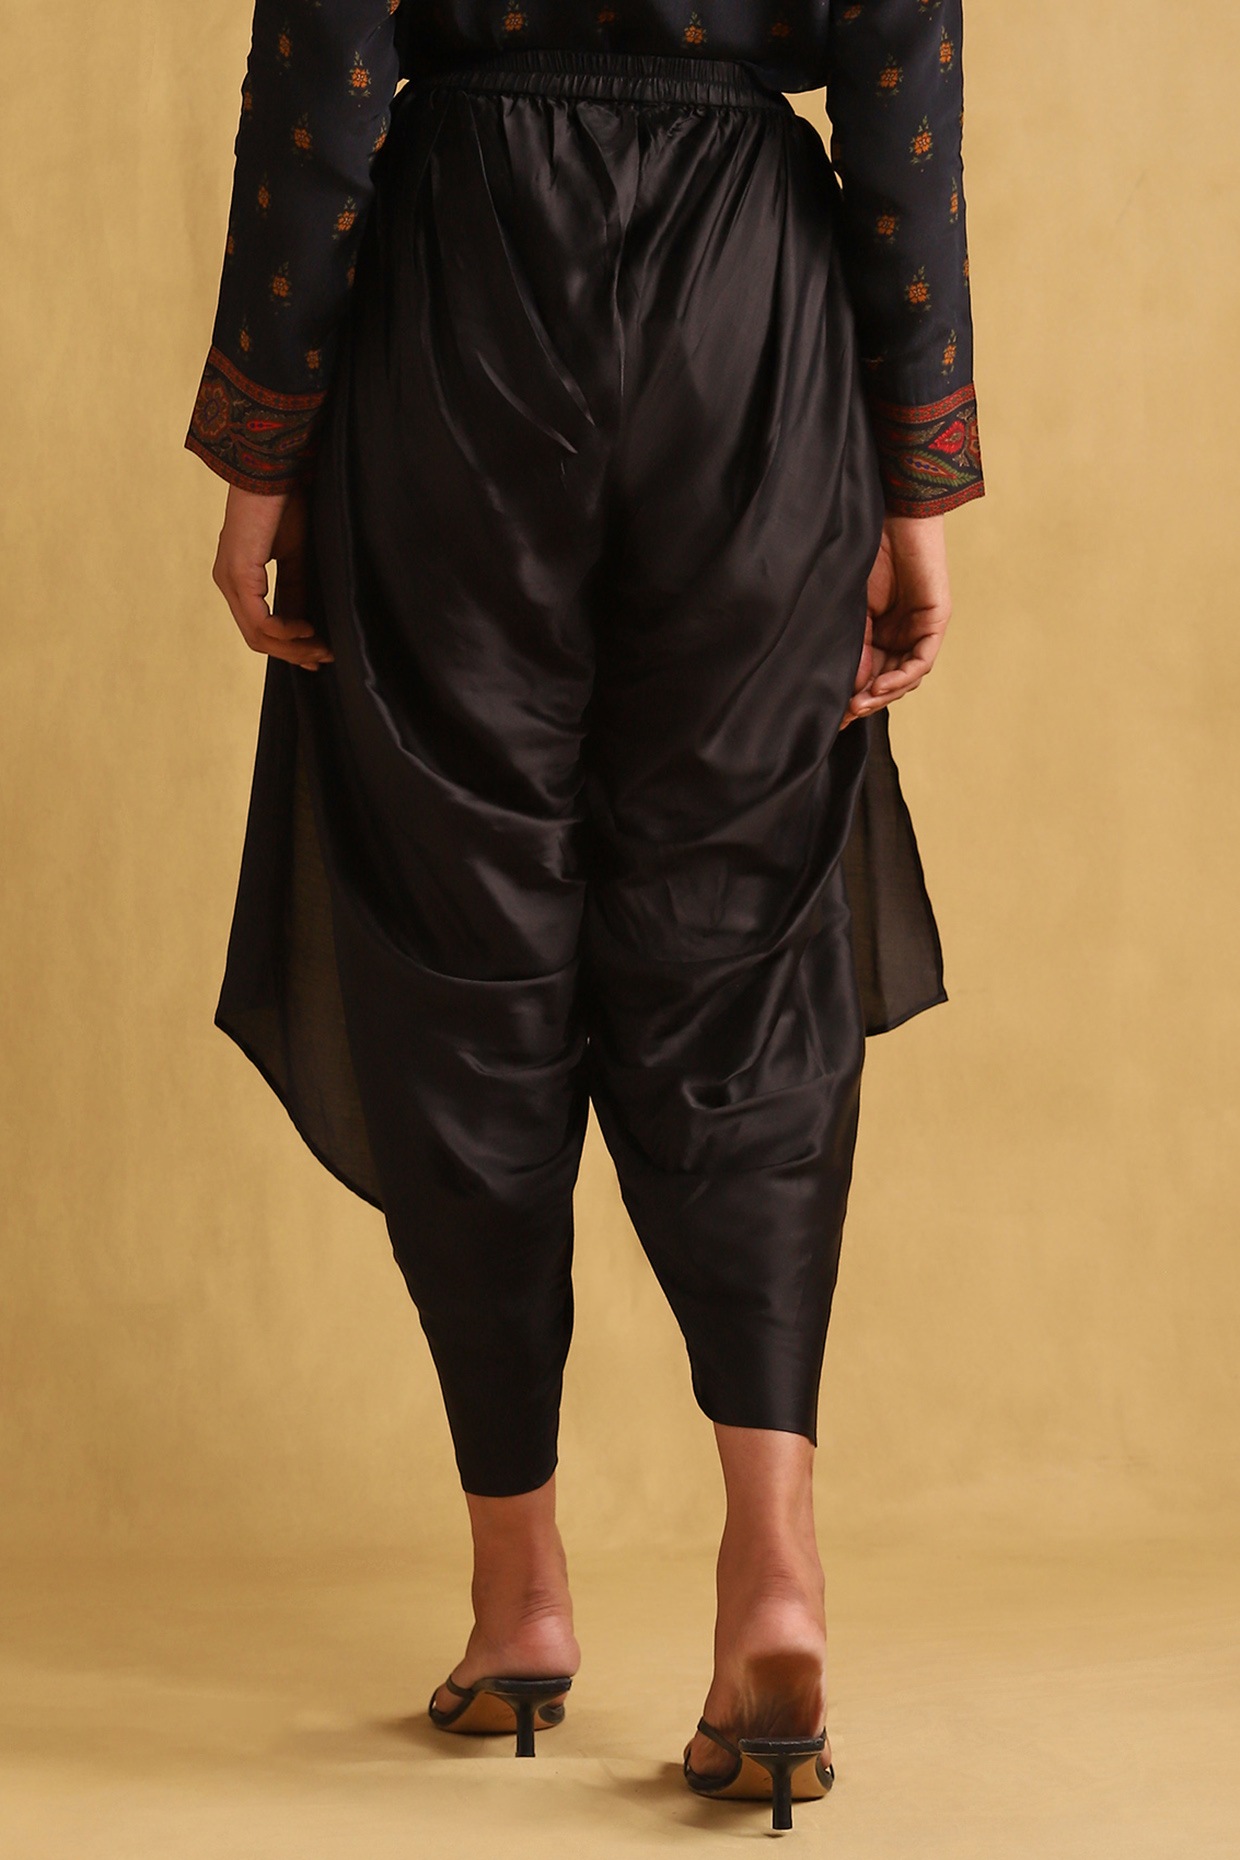 Buy Women Black Mirror Embroidered Top With Dhoti Pants Online at Sassafras